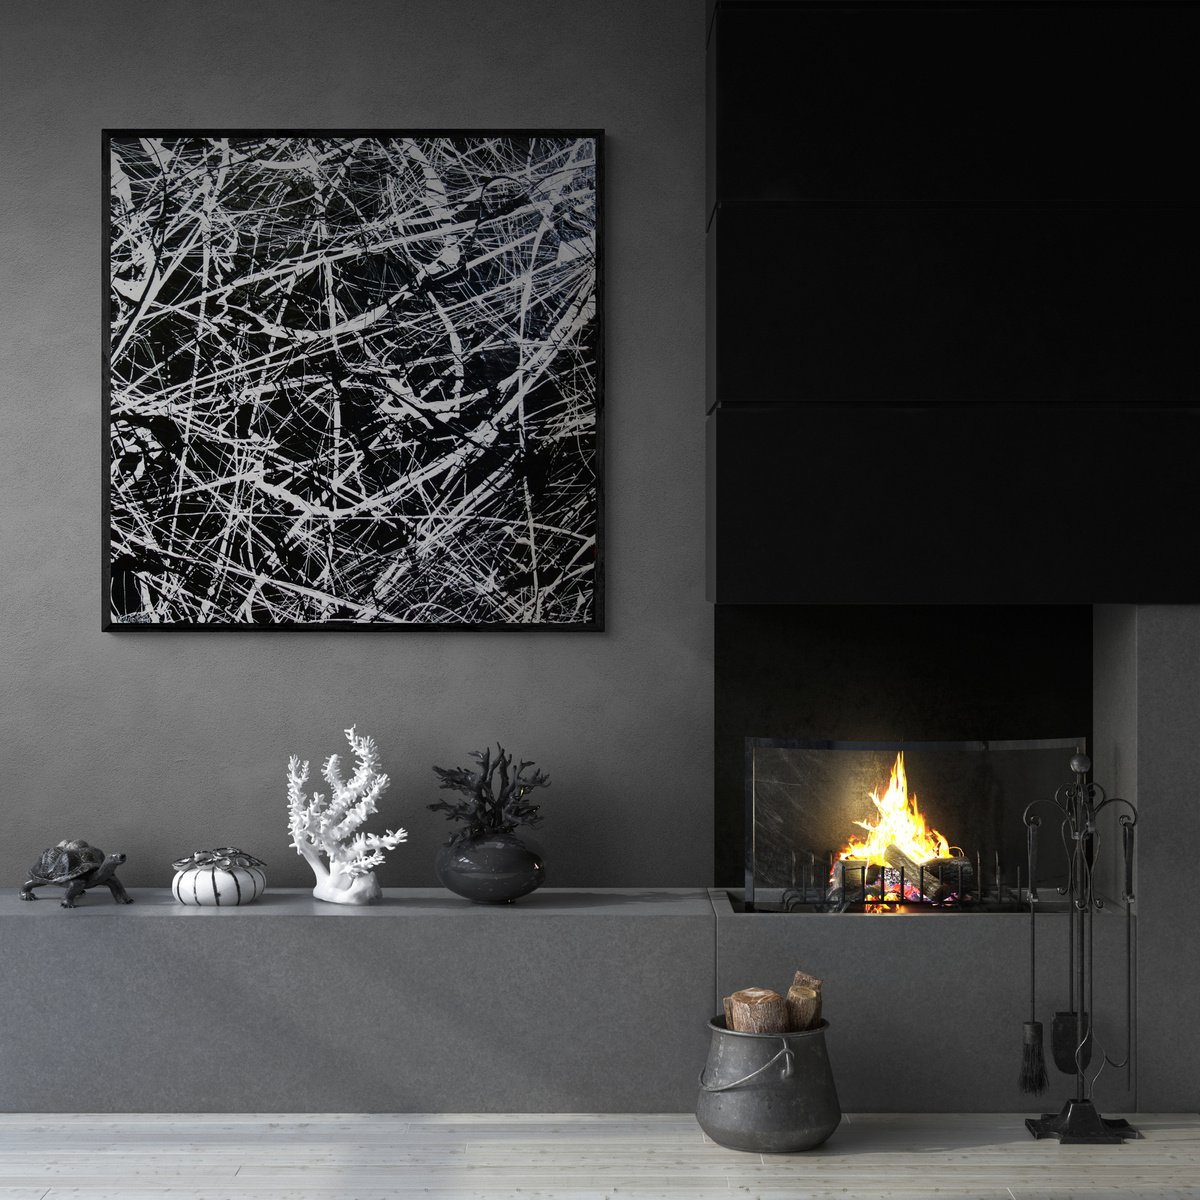 Scatter Brain Squared 150cm x 150cm Black White Textured Abstract Art by Franko